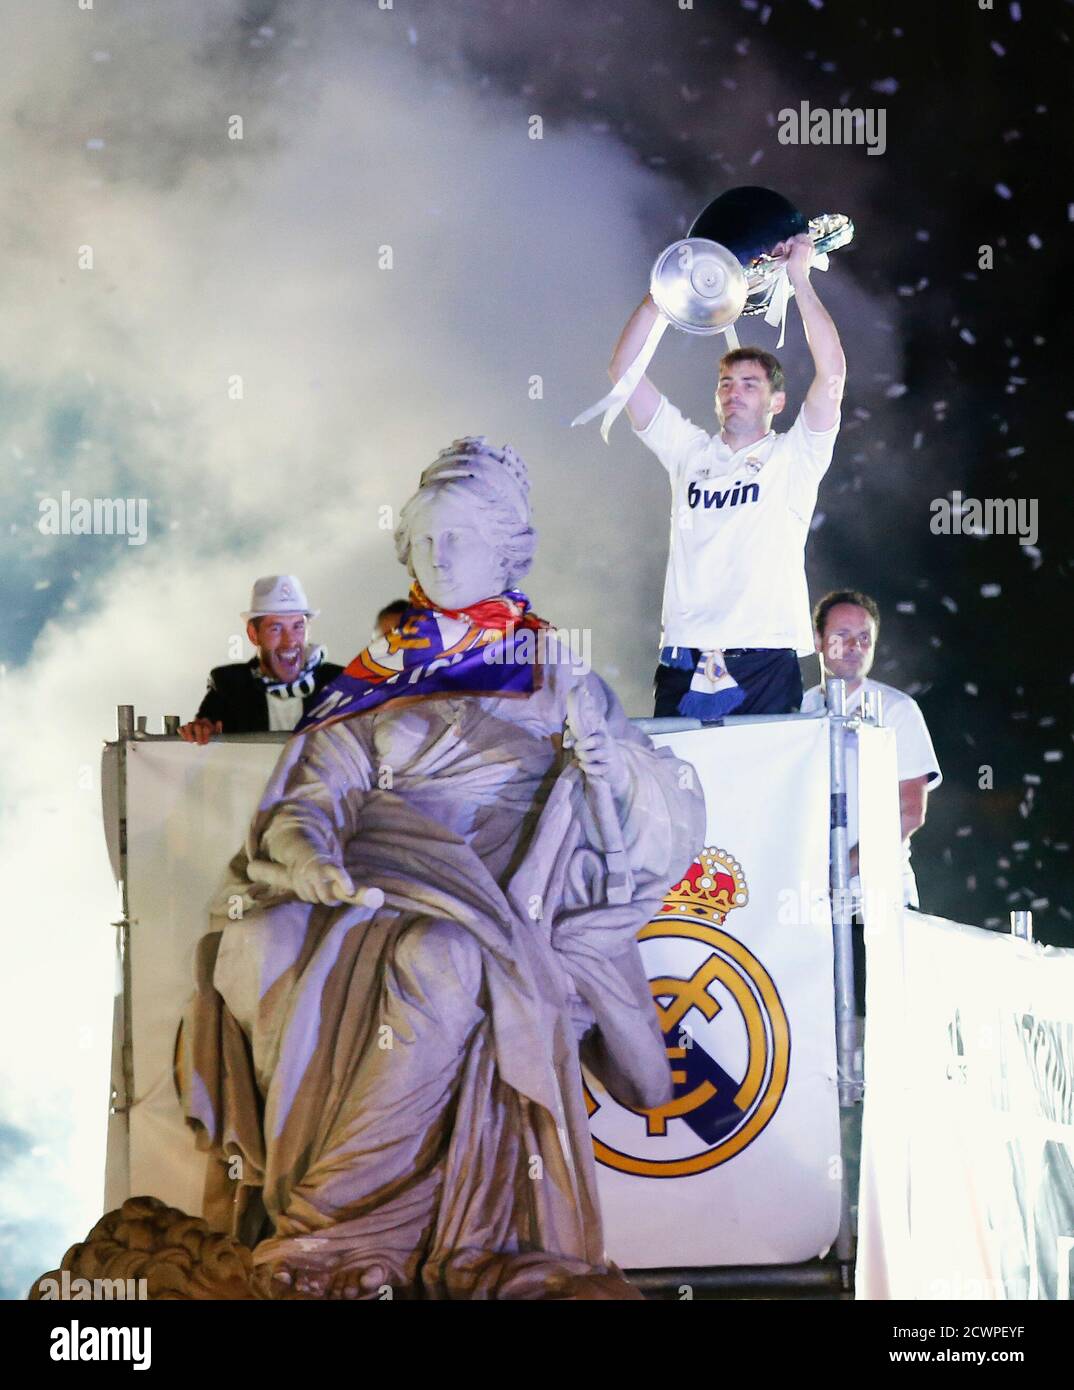 Real Madrid captain's Iker Casillas (R) and Sergio Ramos celebrate with the  trophy after winning their Champions League final soccer match against  Atletico Madrid, on top of the Cibeles statue in Madrid